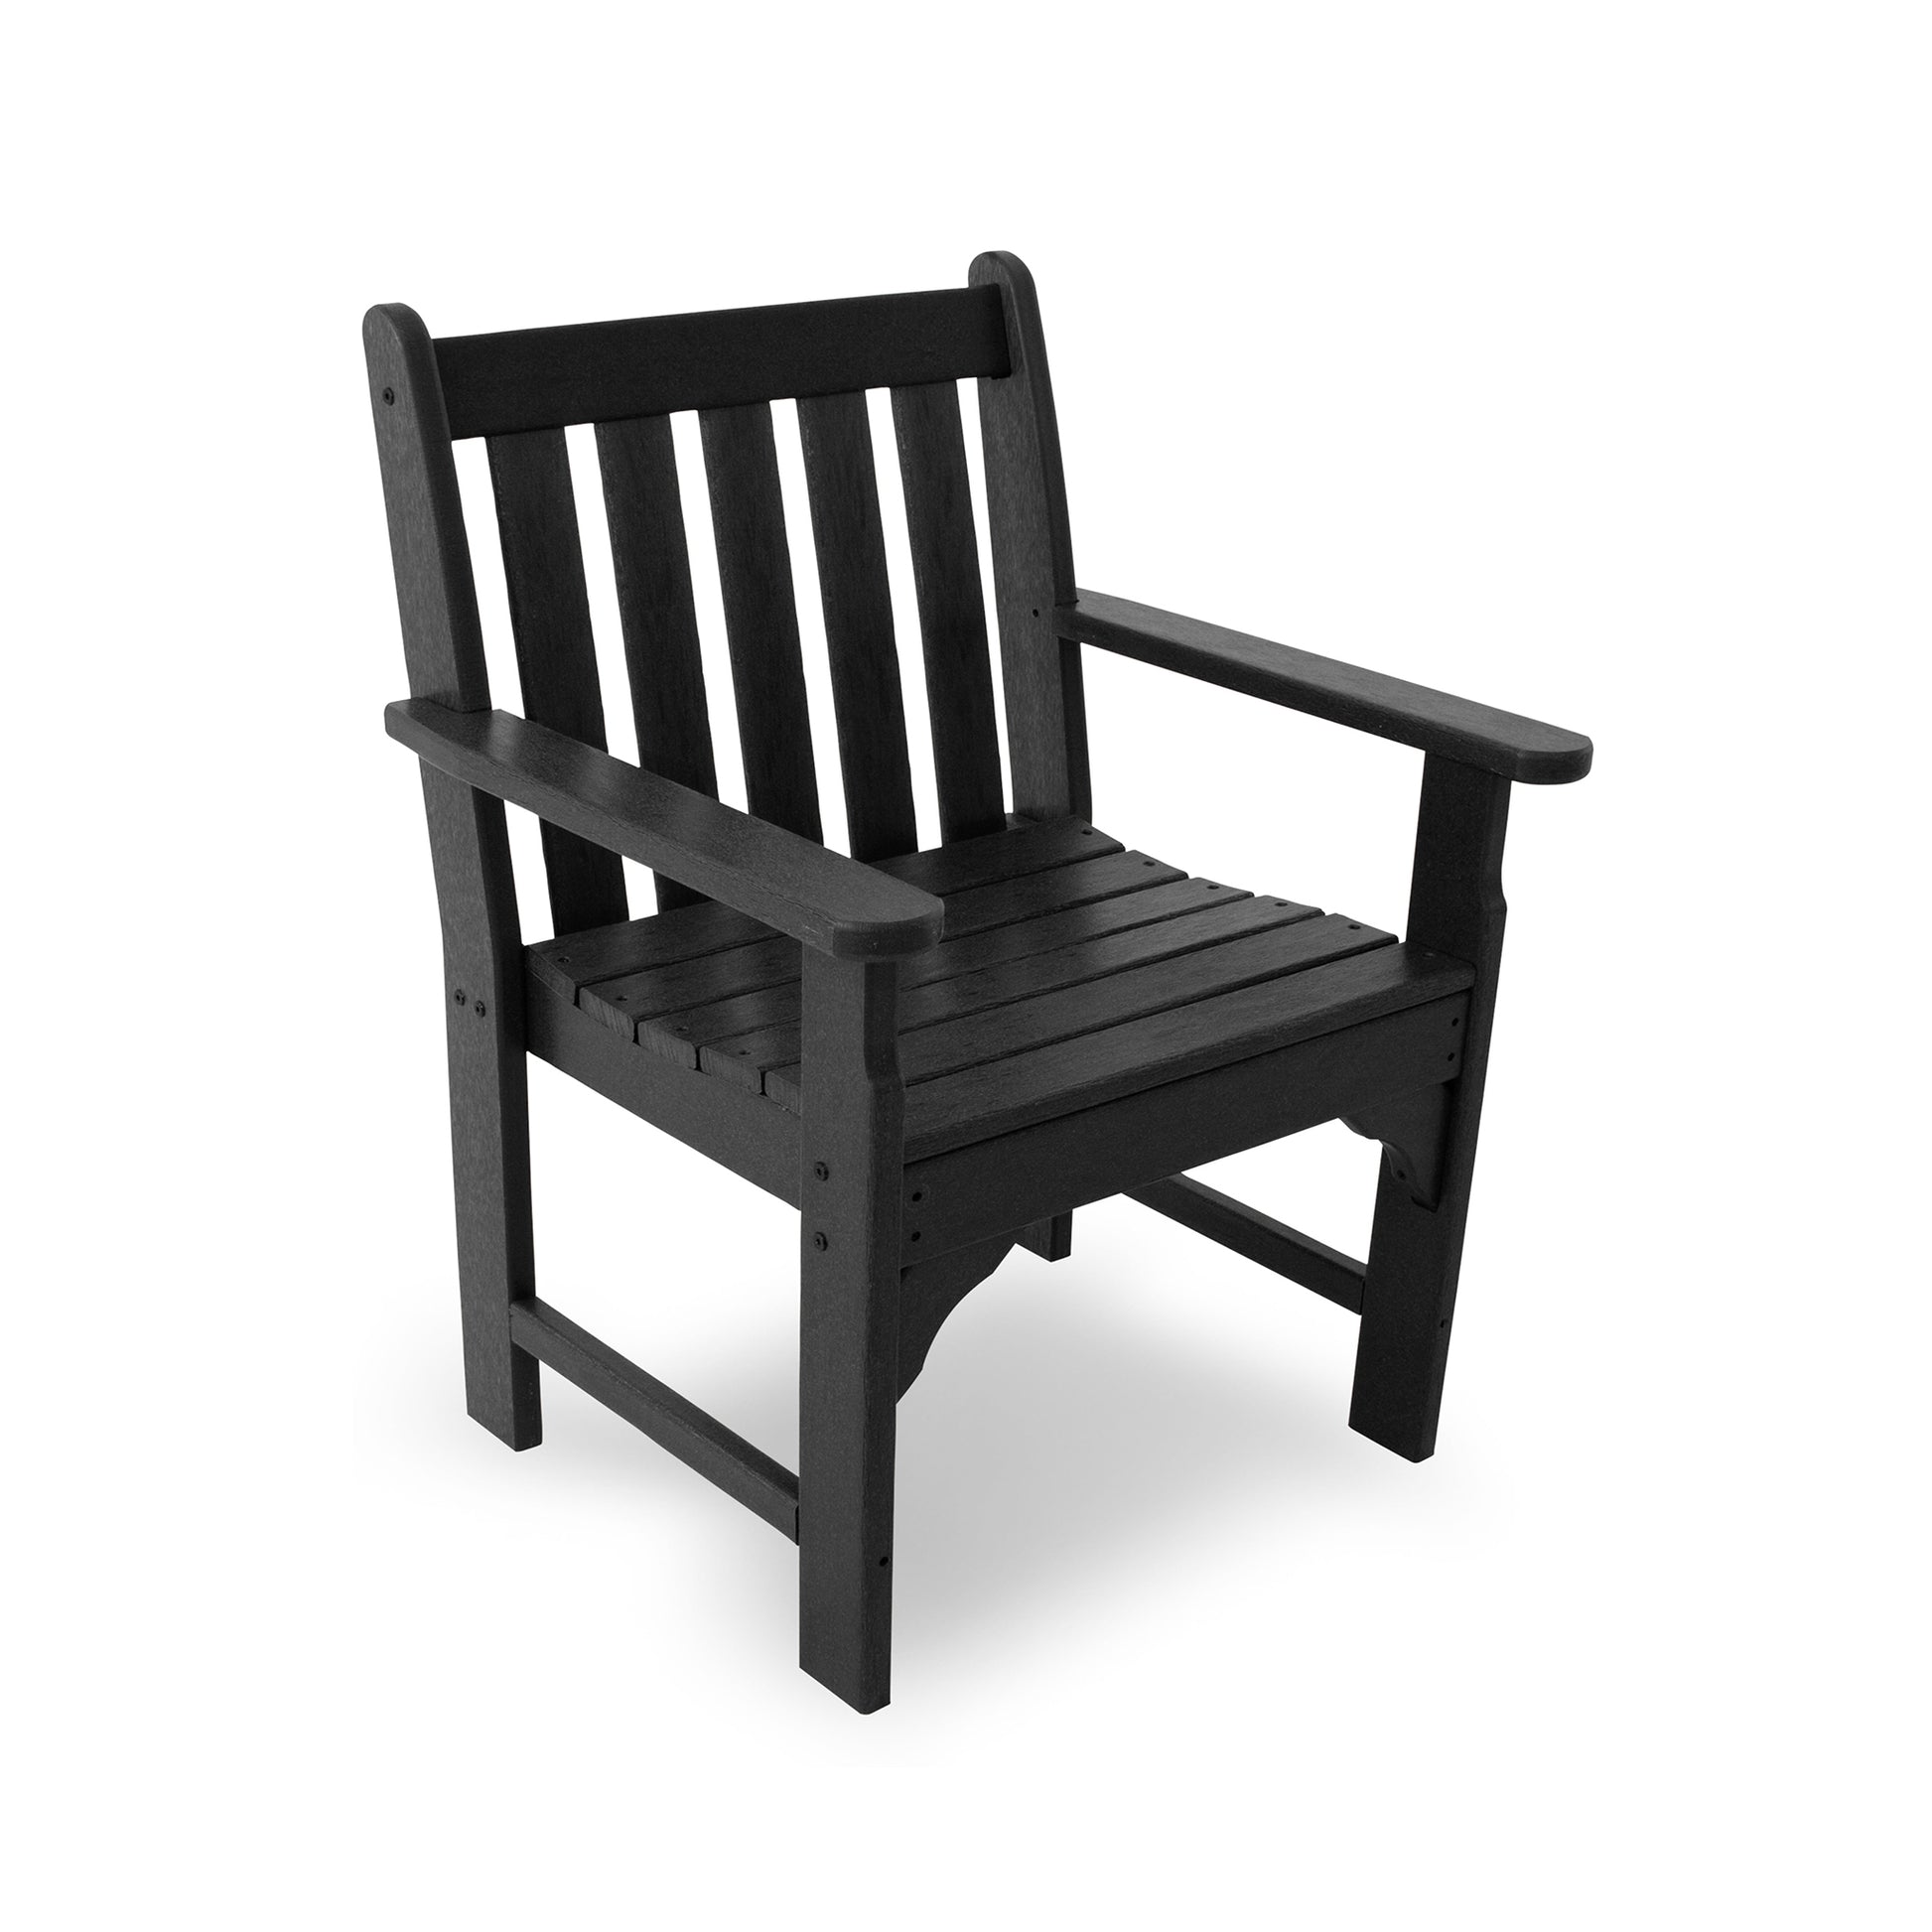 A black POLYWOOD® Vineyard Arm Chair with armrests and vertical slats on the back and seat, isolated on a white background.